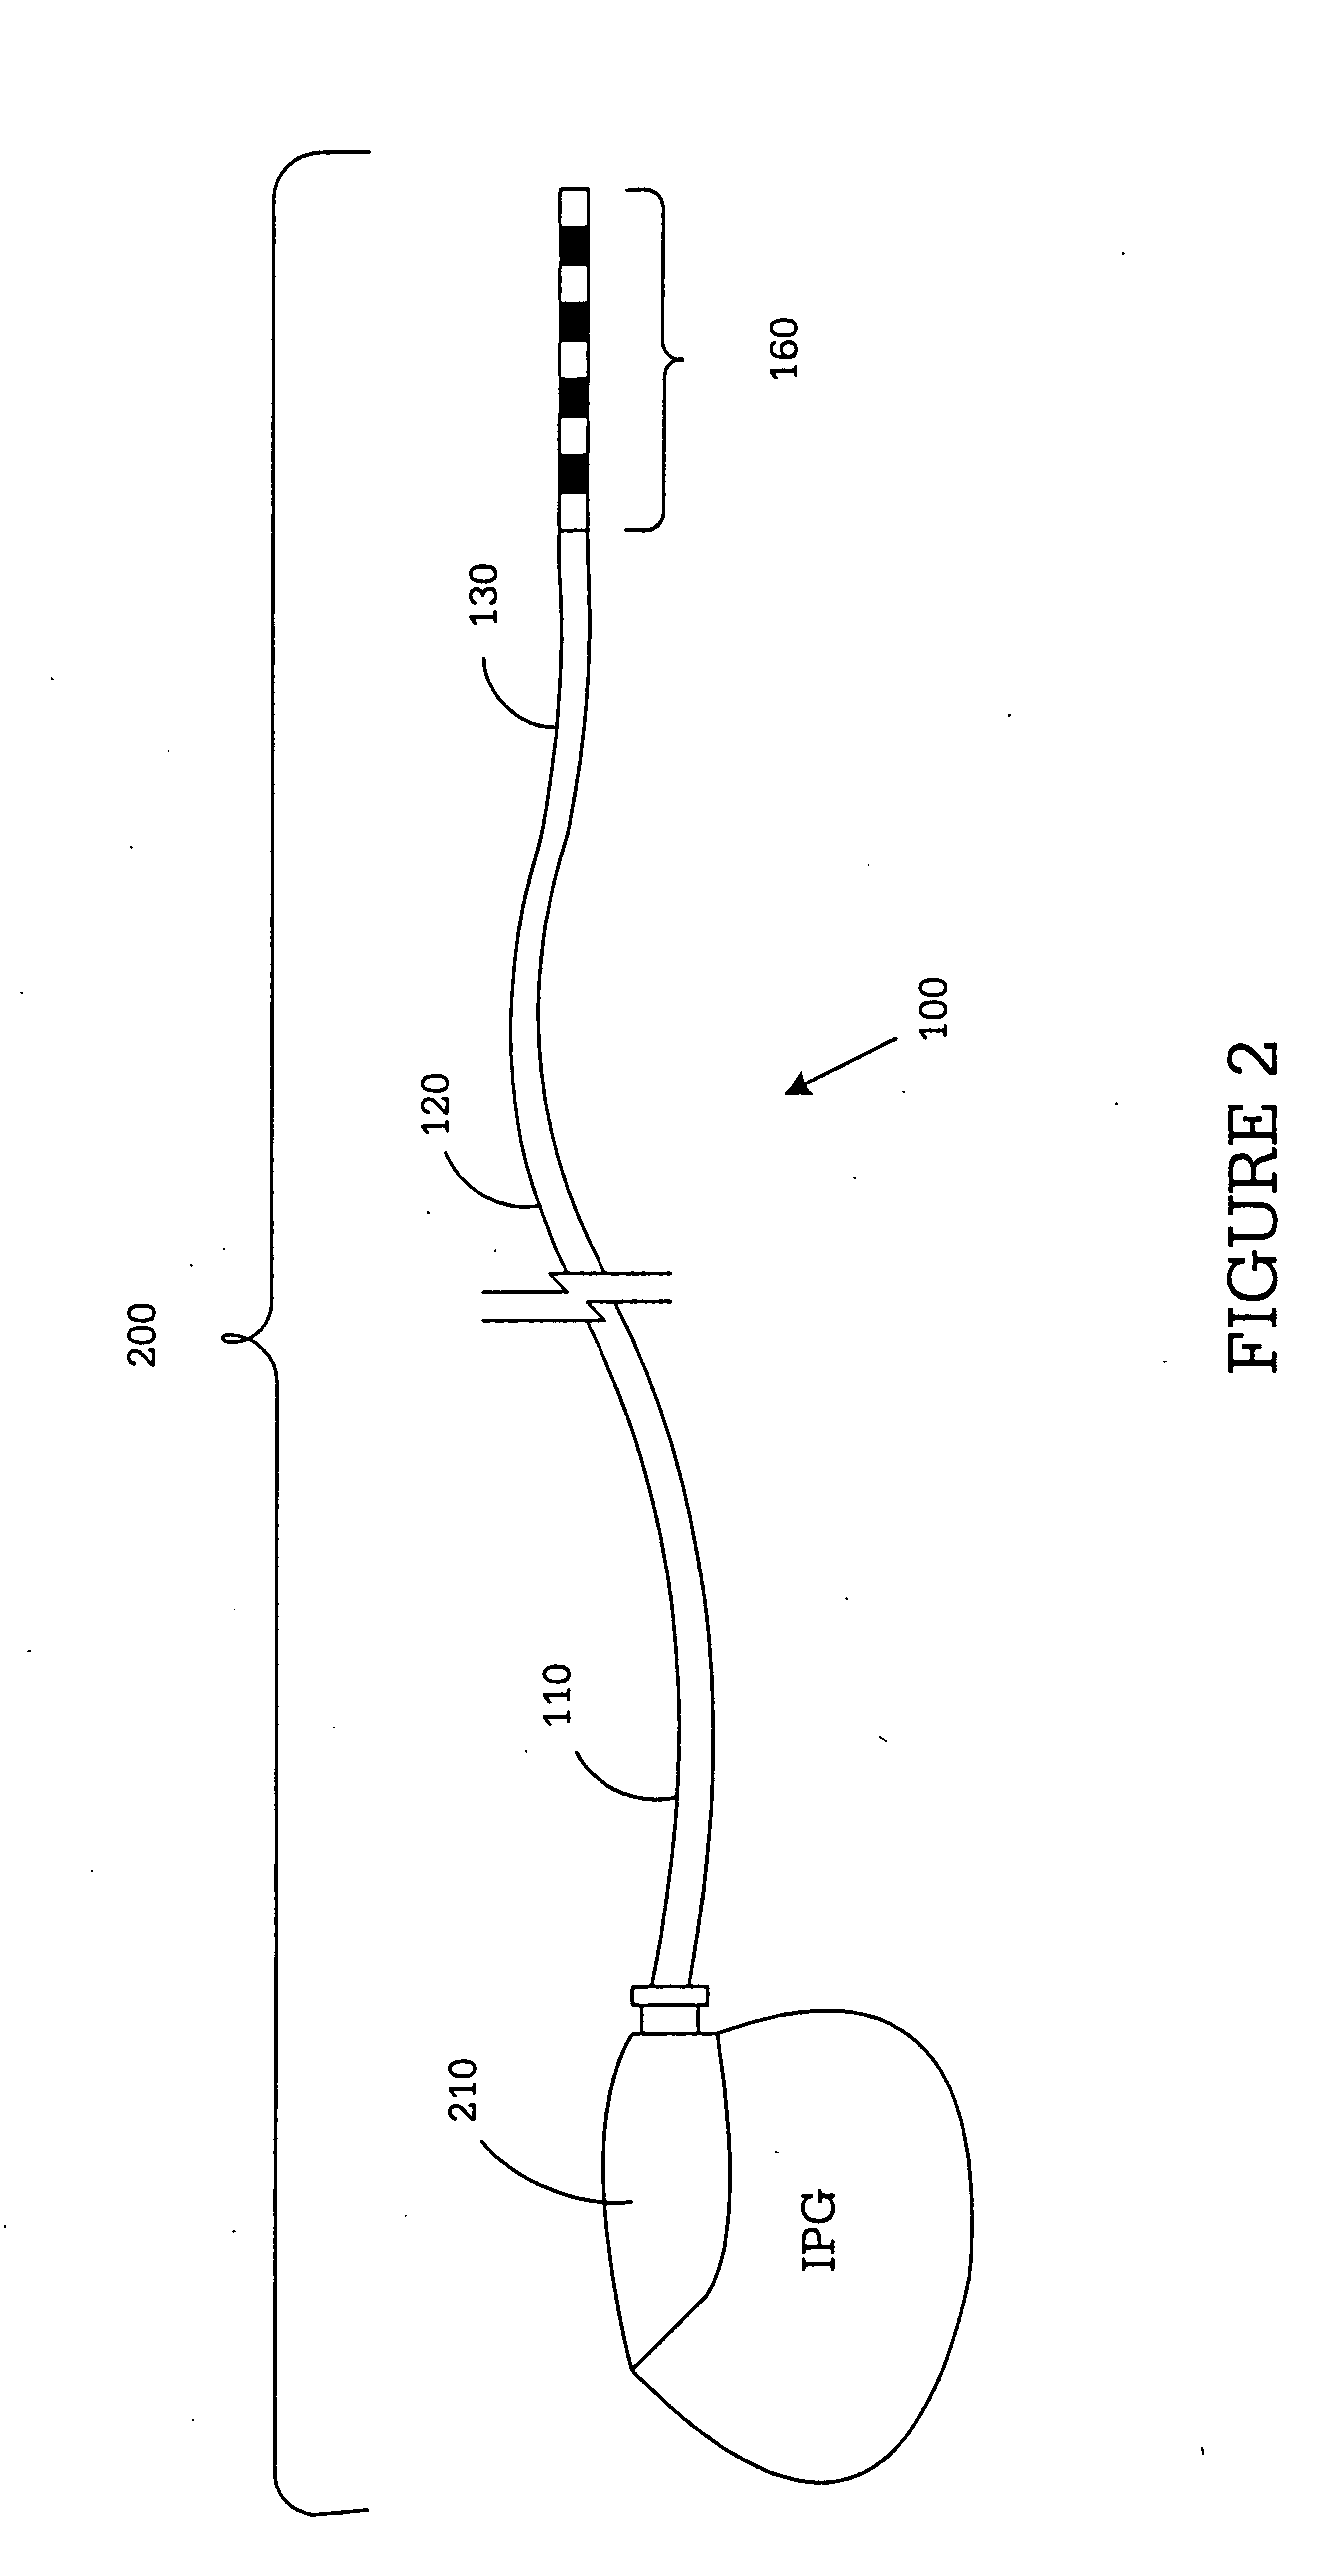 System and method for providing a medical lead body